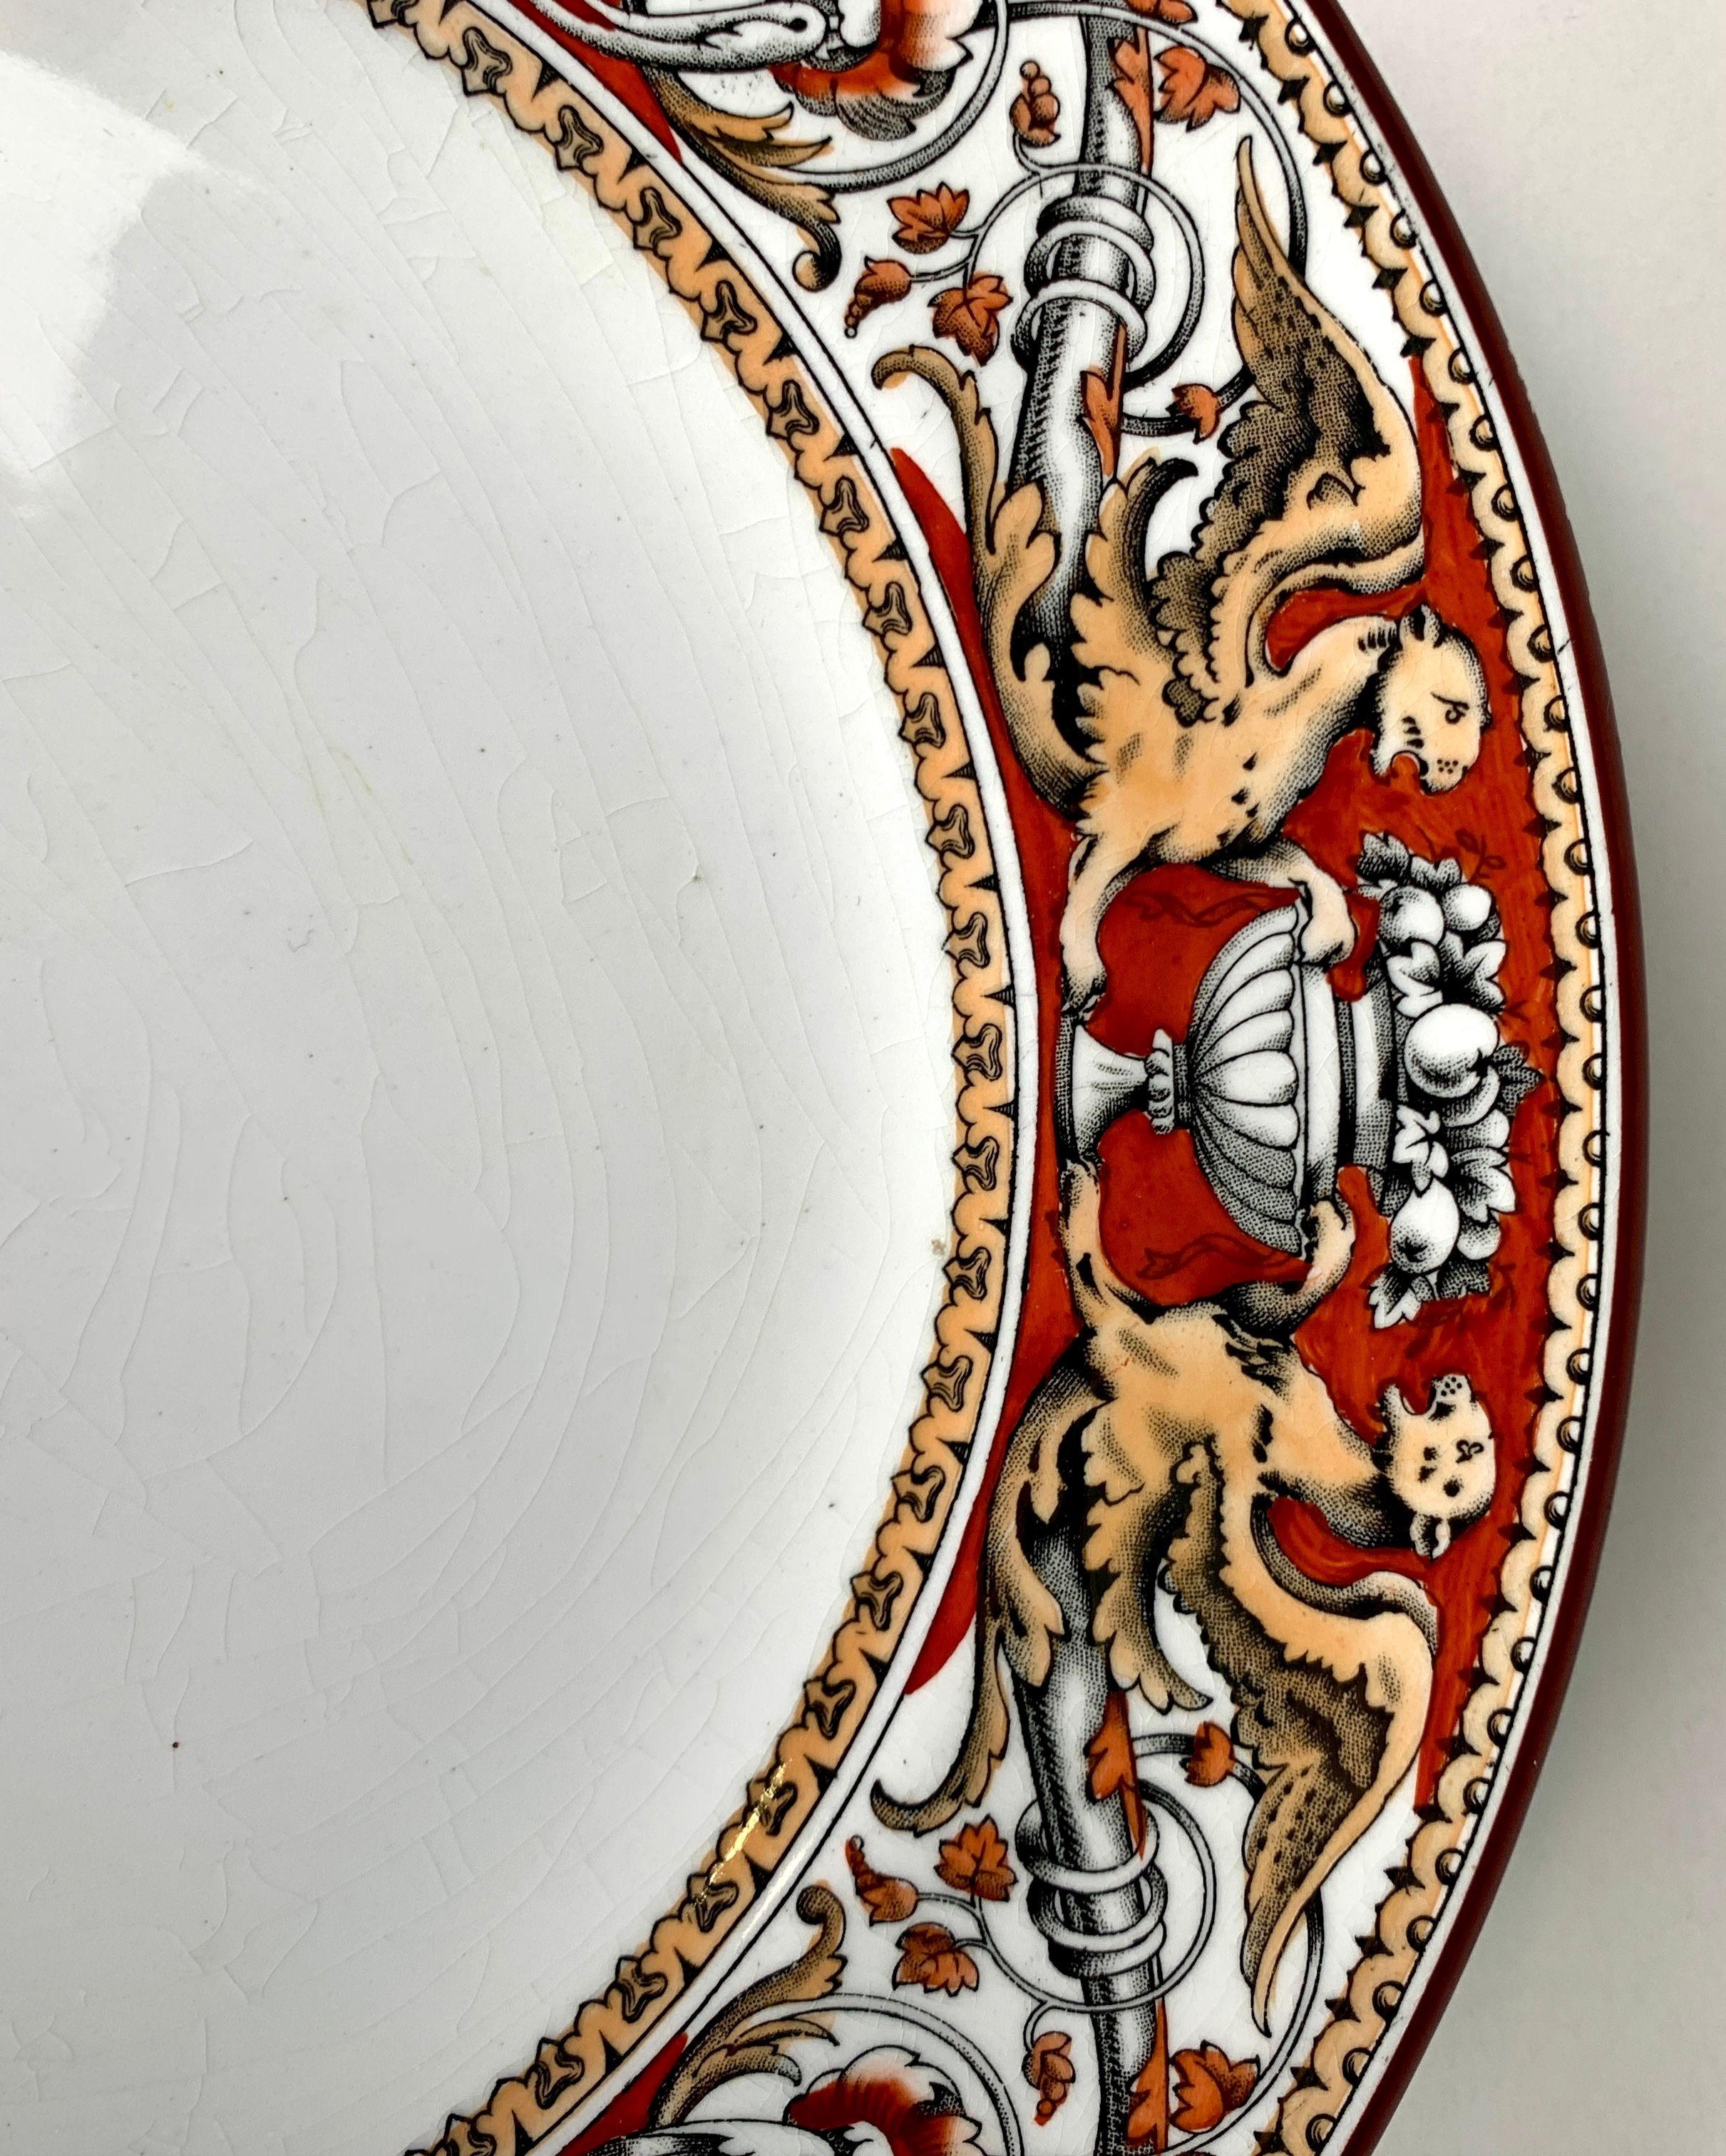 English Set of 12 Dinner Plates Neoclassical Made by Minton Circa 1860 For Sale